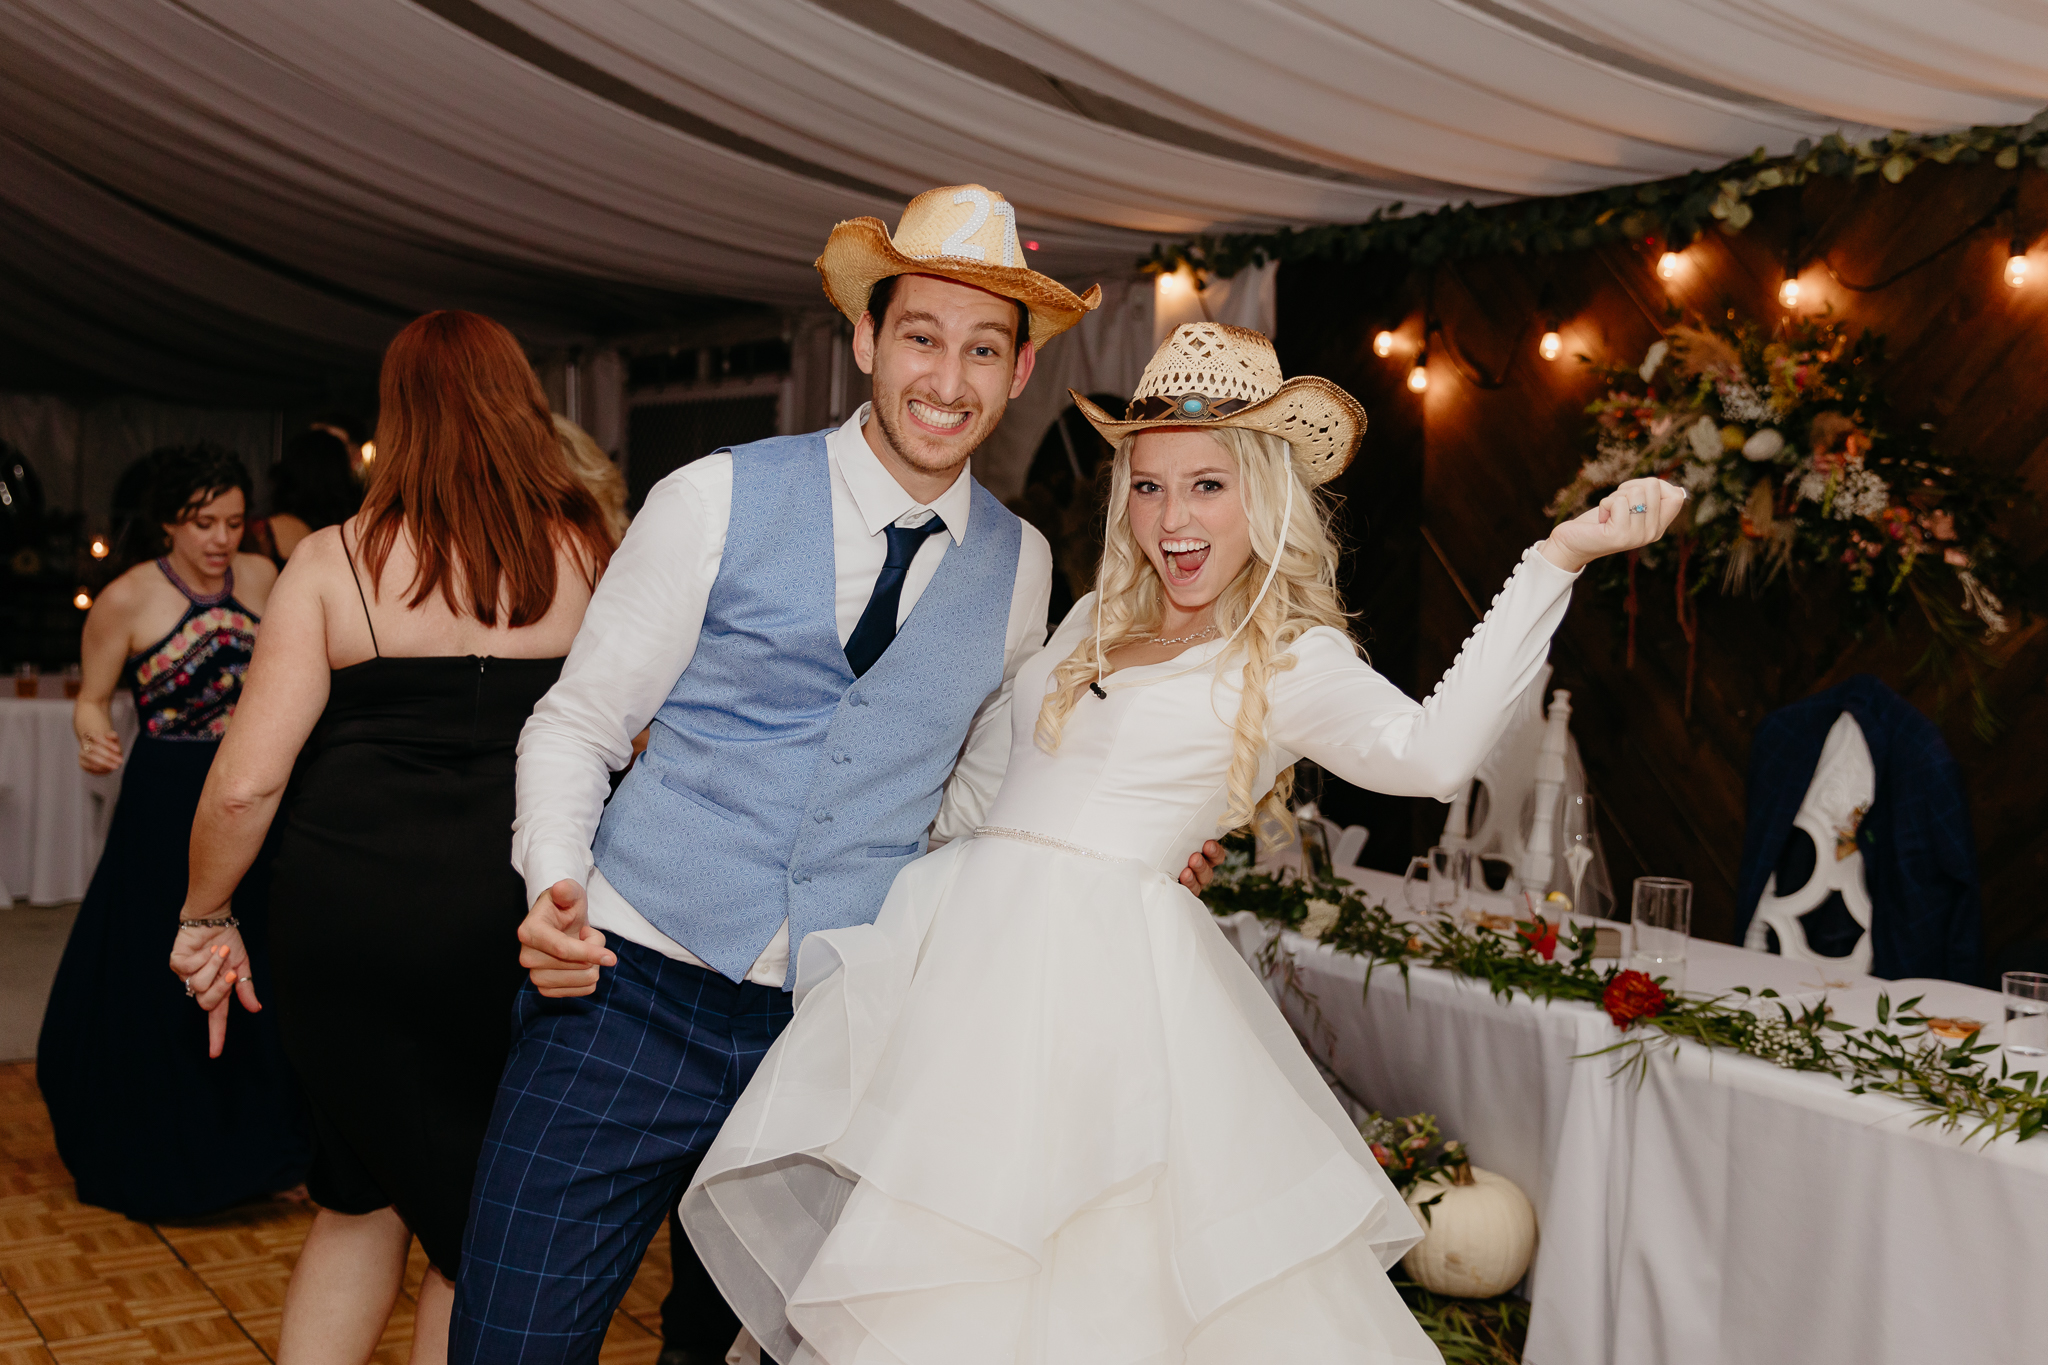 Bride and groom smile and pose with cowboy hats on at their tent wedding reception in Chicago